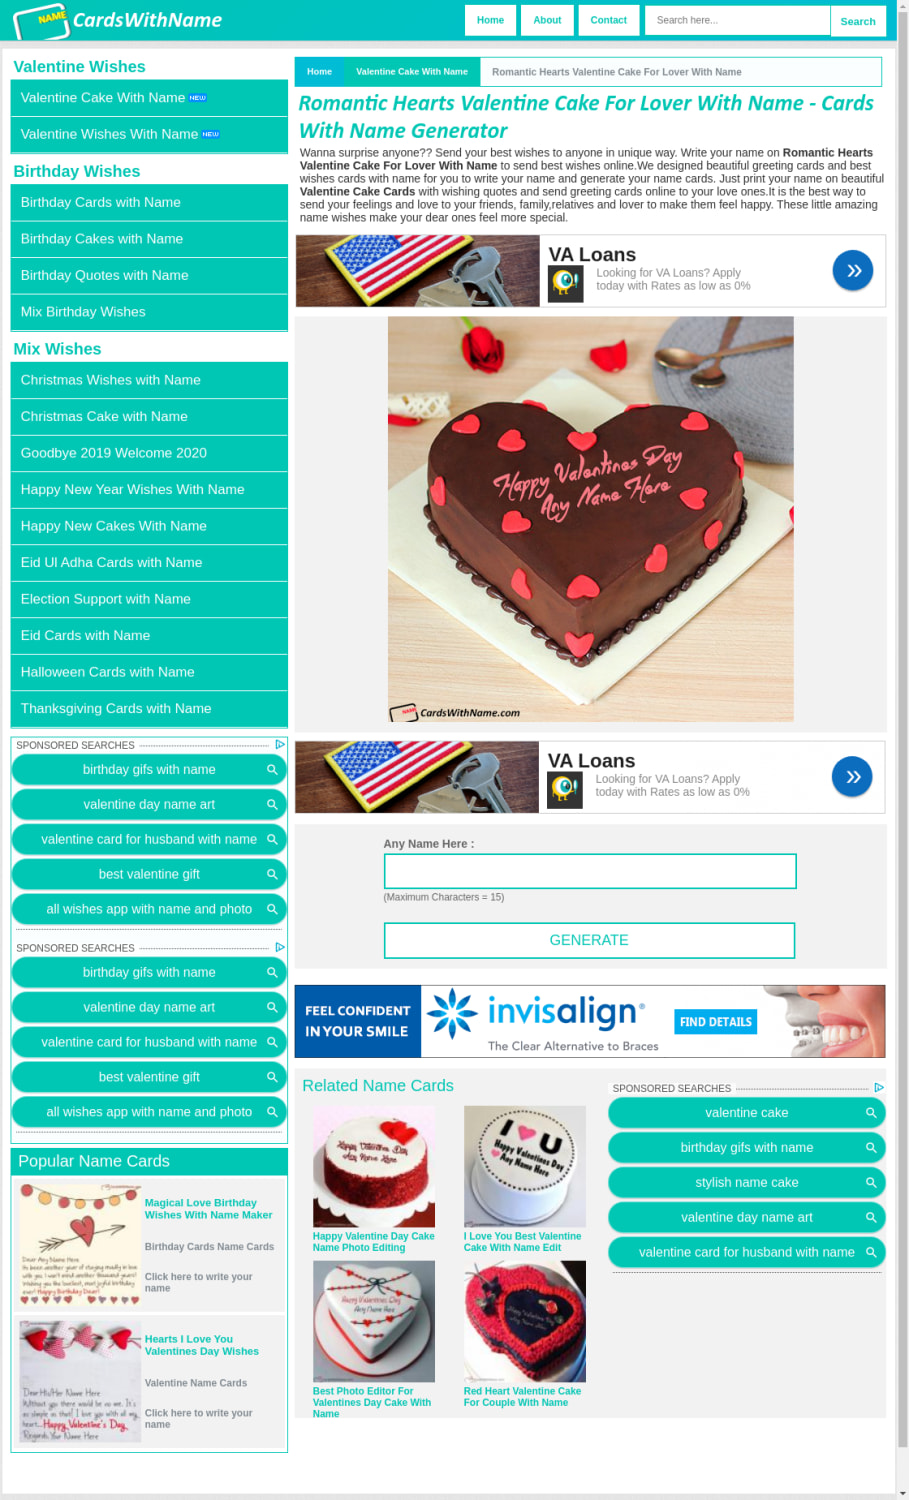 Romantic Hearts Valentine Cake For Lover With Name